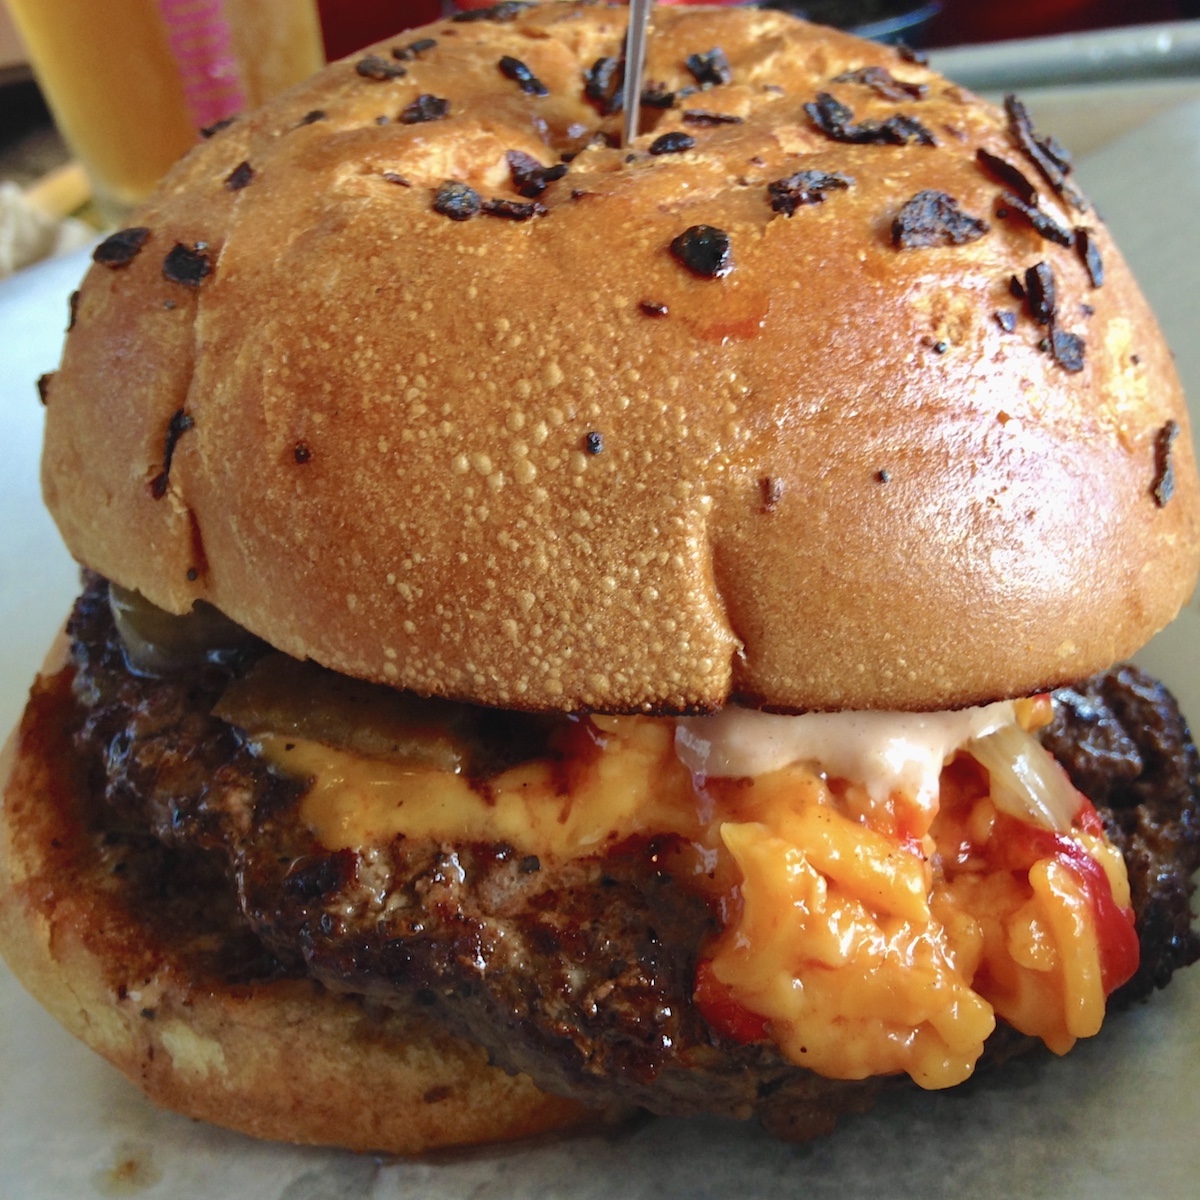 Charlie White Burger (Pimento Cheese, Caramelized Onions) from Tucker Duke's in Deerfield Beach, Florida